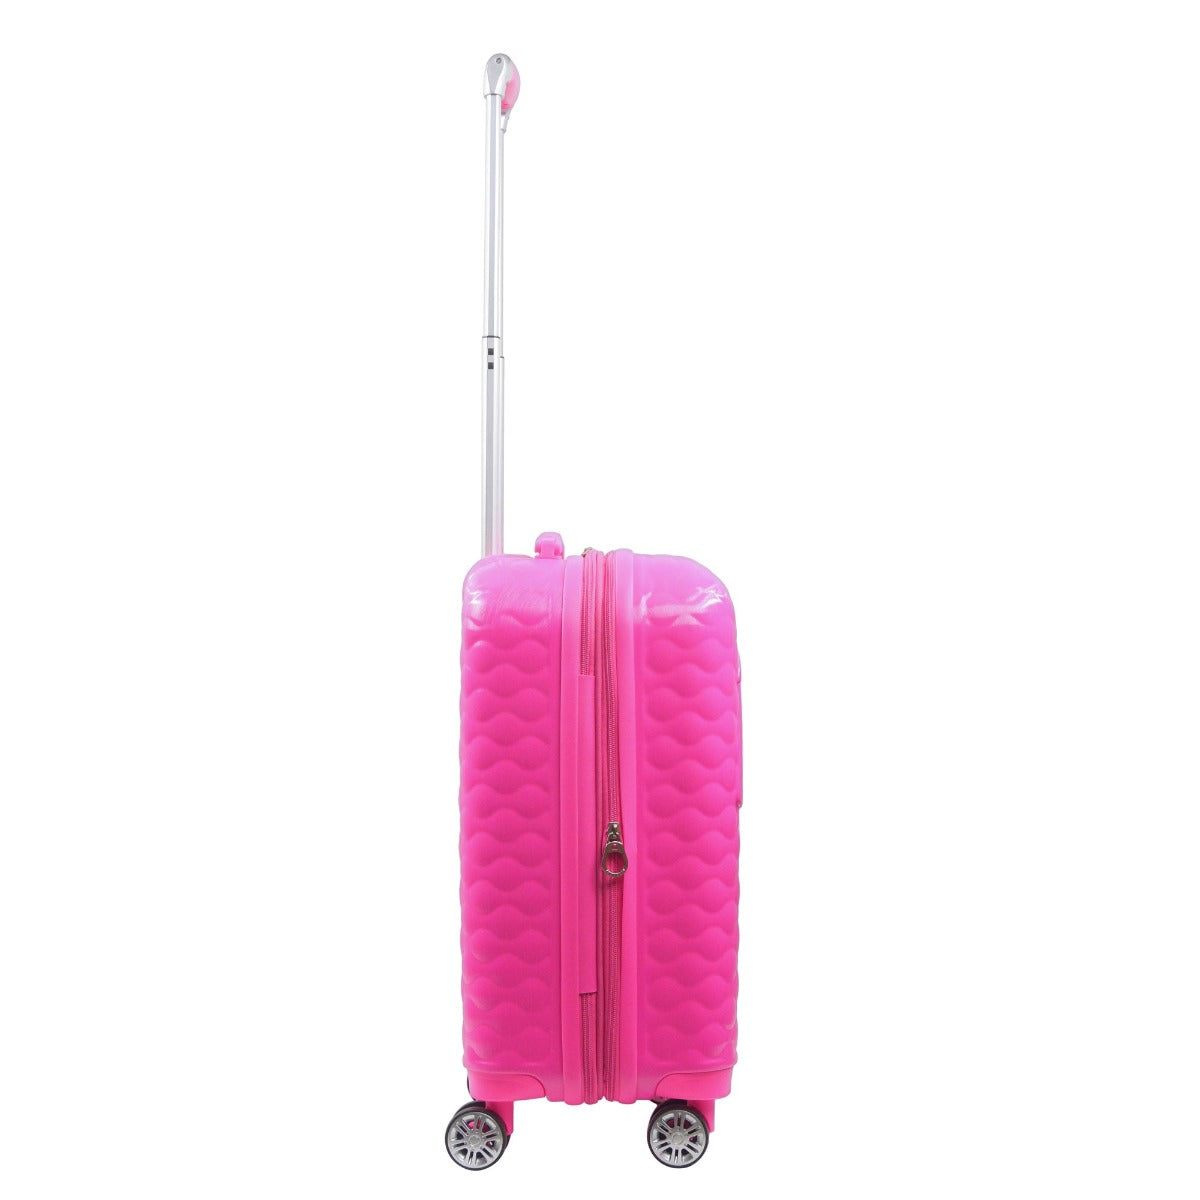 Hot pink Barbie quilted texture 22.5" carry-on rolling luggage